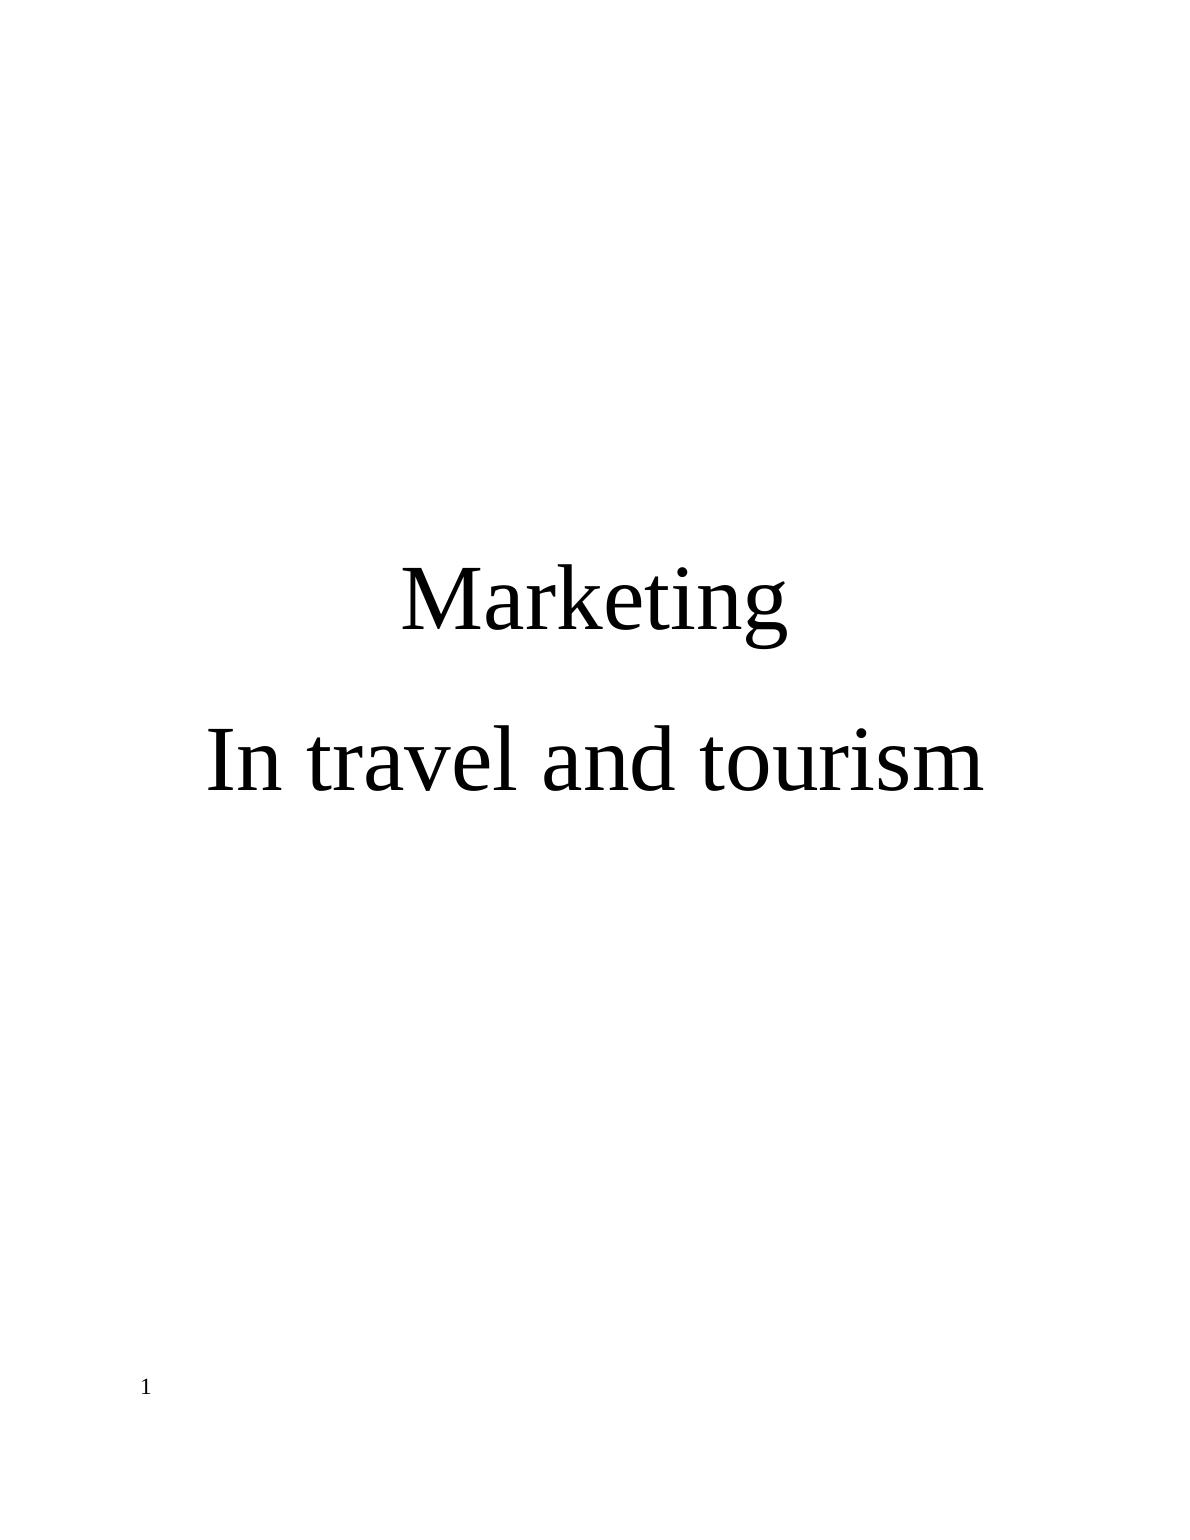 Marketing Planning at Thomas Cook Group : Report_1